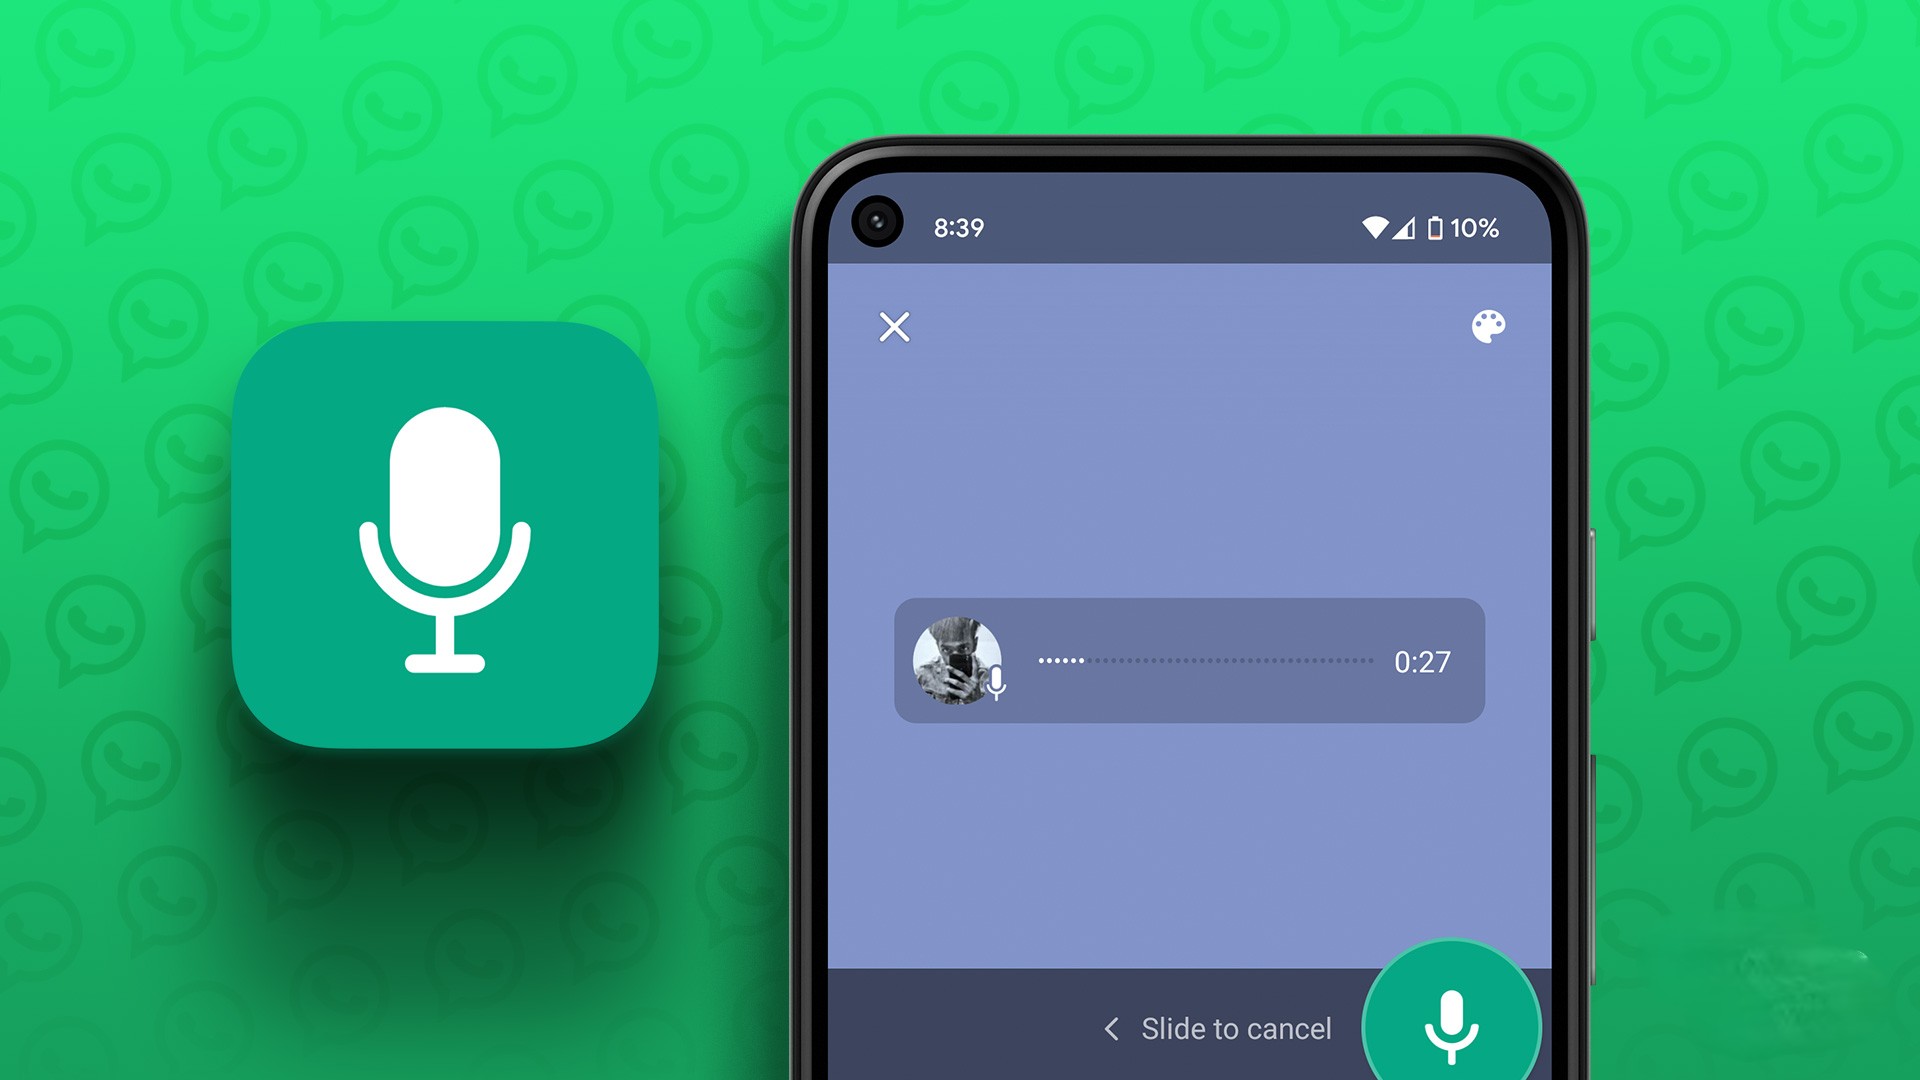 WhatsApp Tips: How To Share Voice Status On Android And iPhone - Step-By-Step Guide